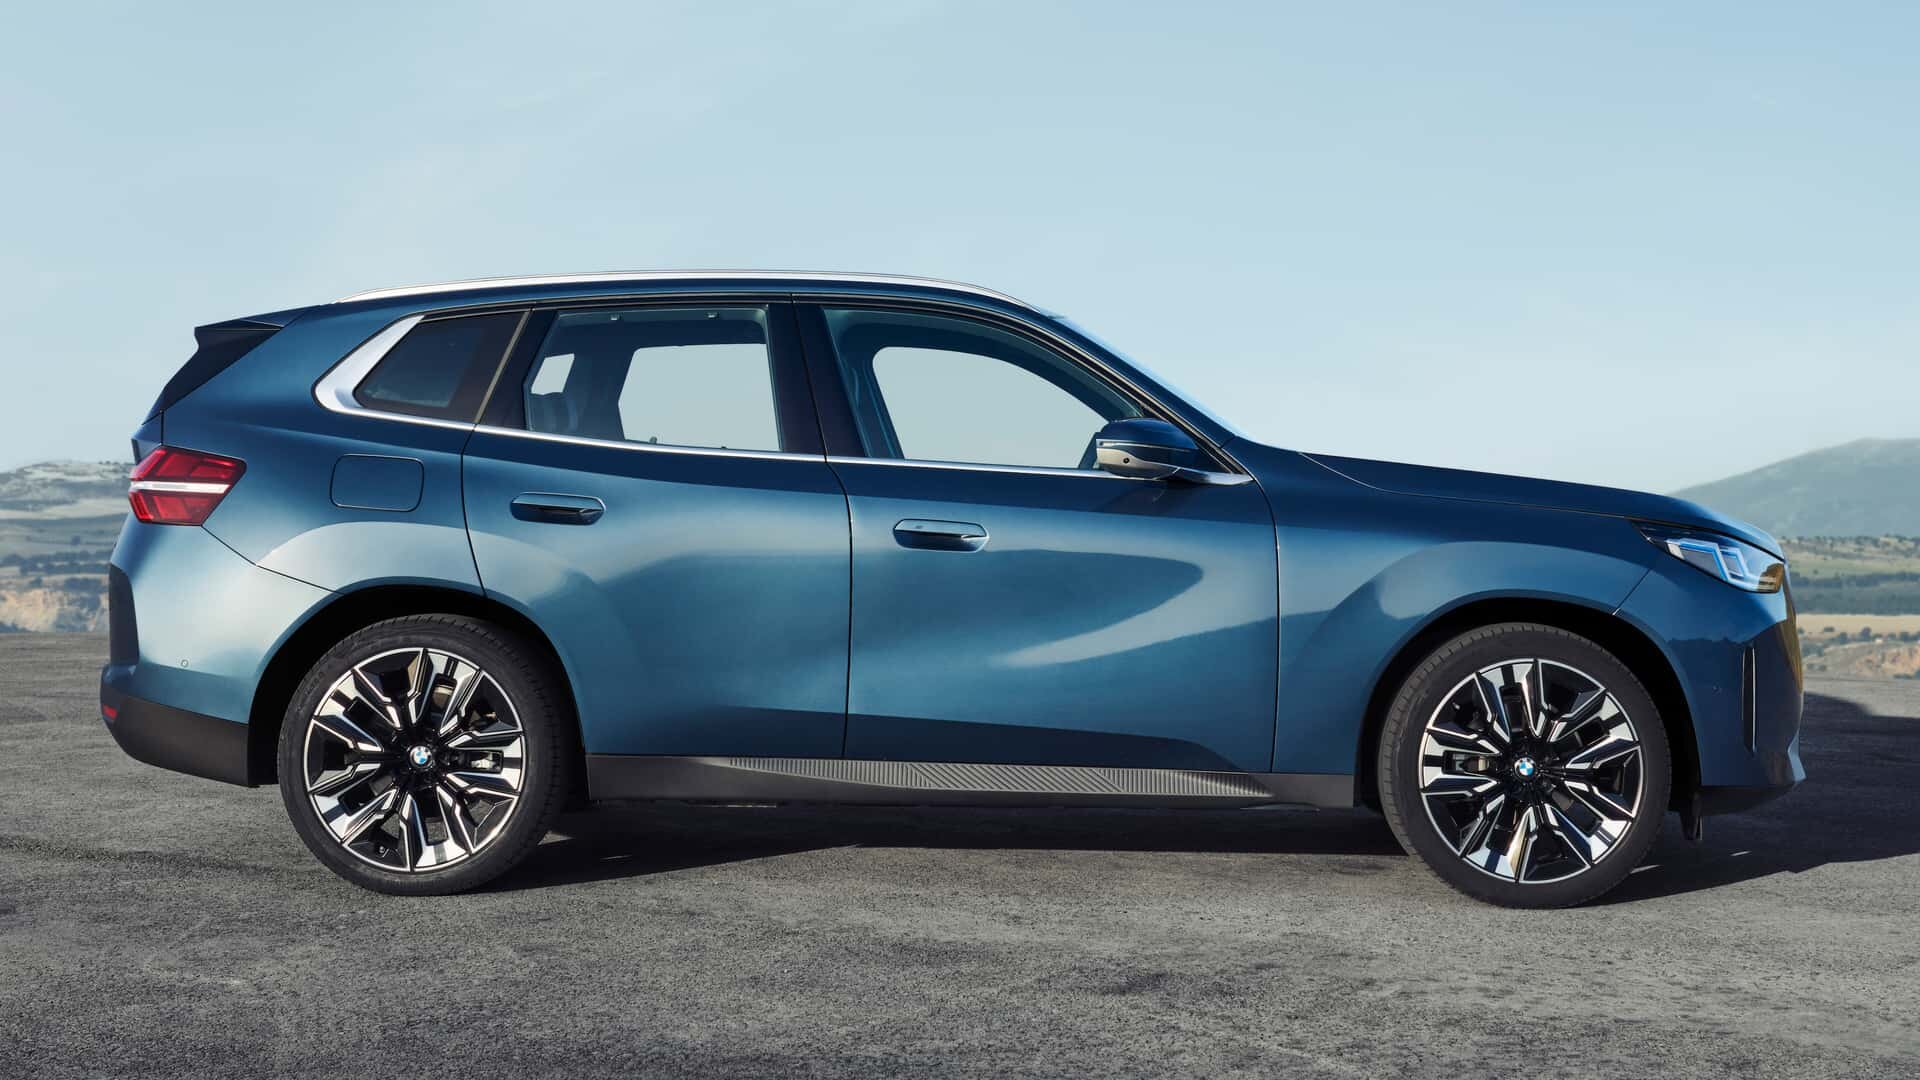 The new generation BMW X3 has an extravagant exterior